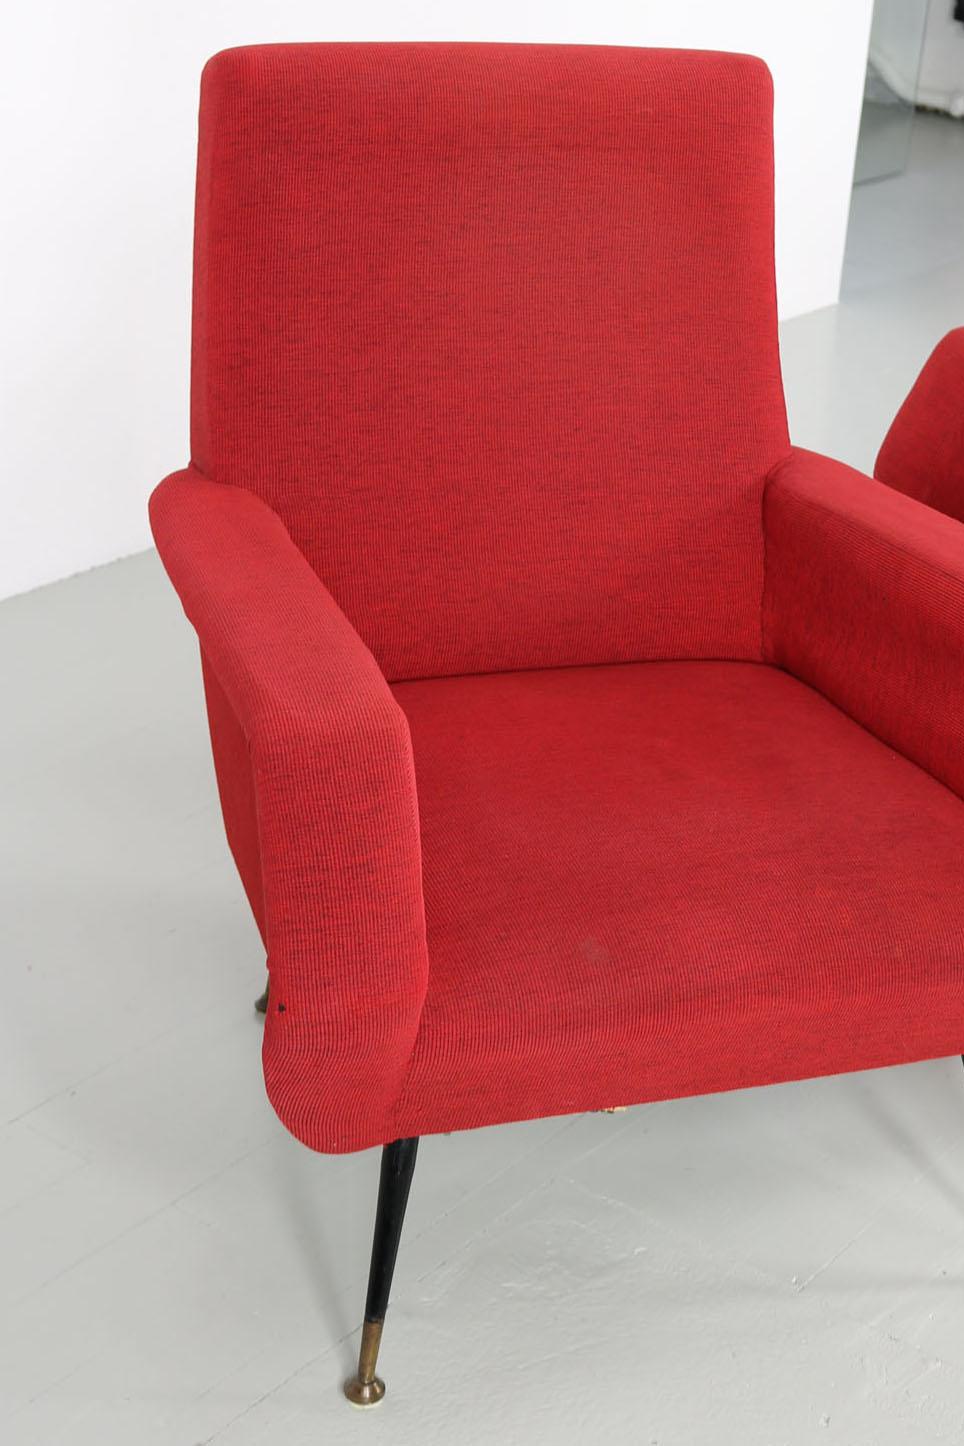 Red Upholstered Armchair with Metal Base, Brass Elements, 1950s For Sale 6